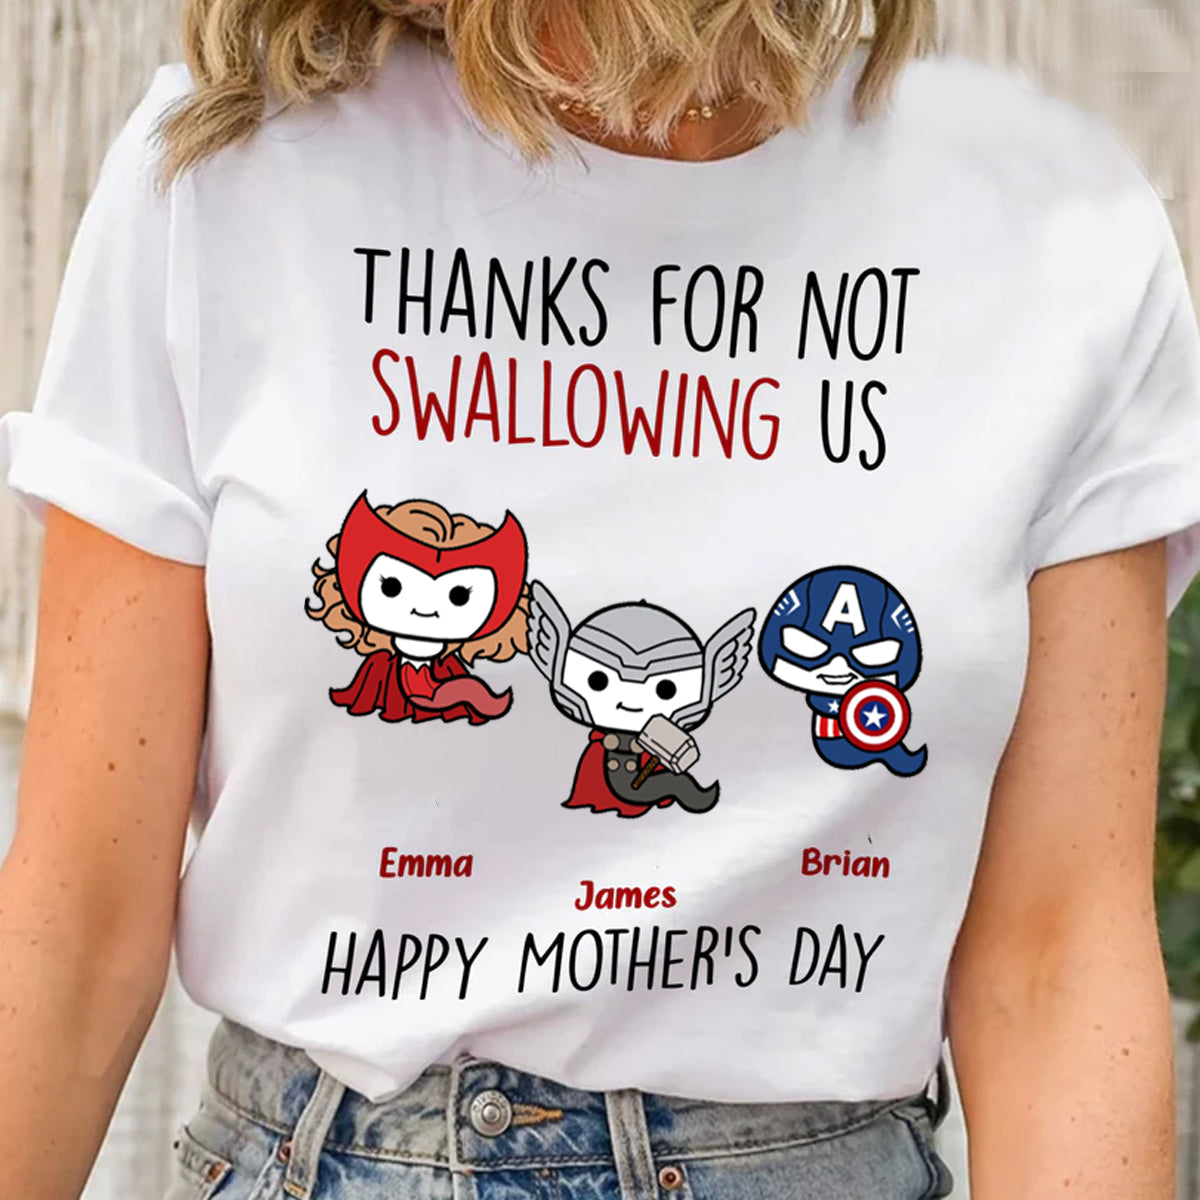 Thank Super Mom For Not Swallowing Us - Gift For Mom, Grandmother - Personalized Shirt